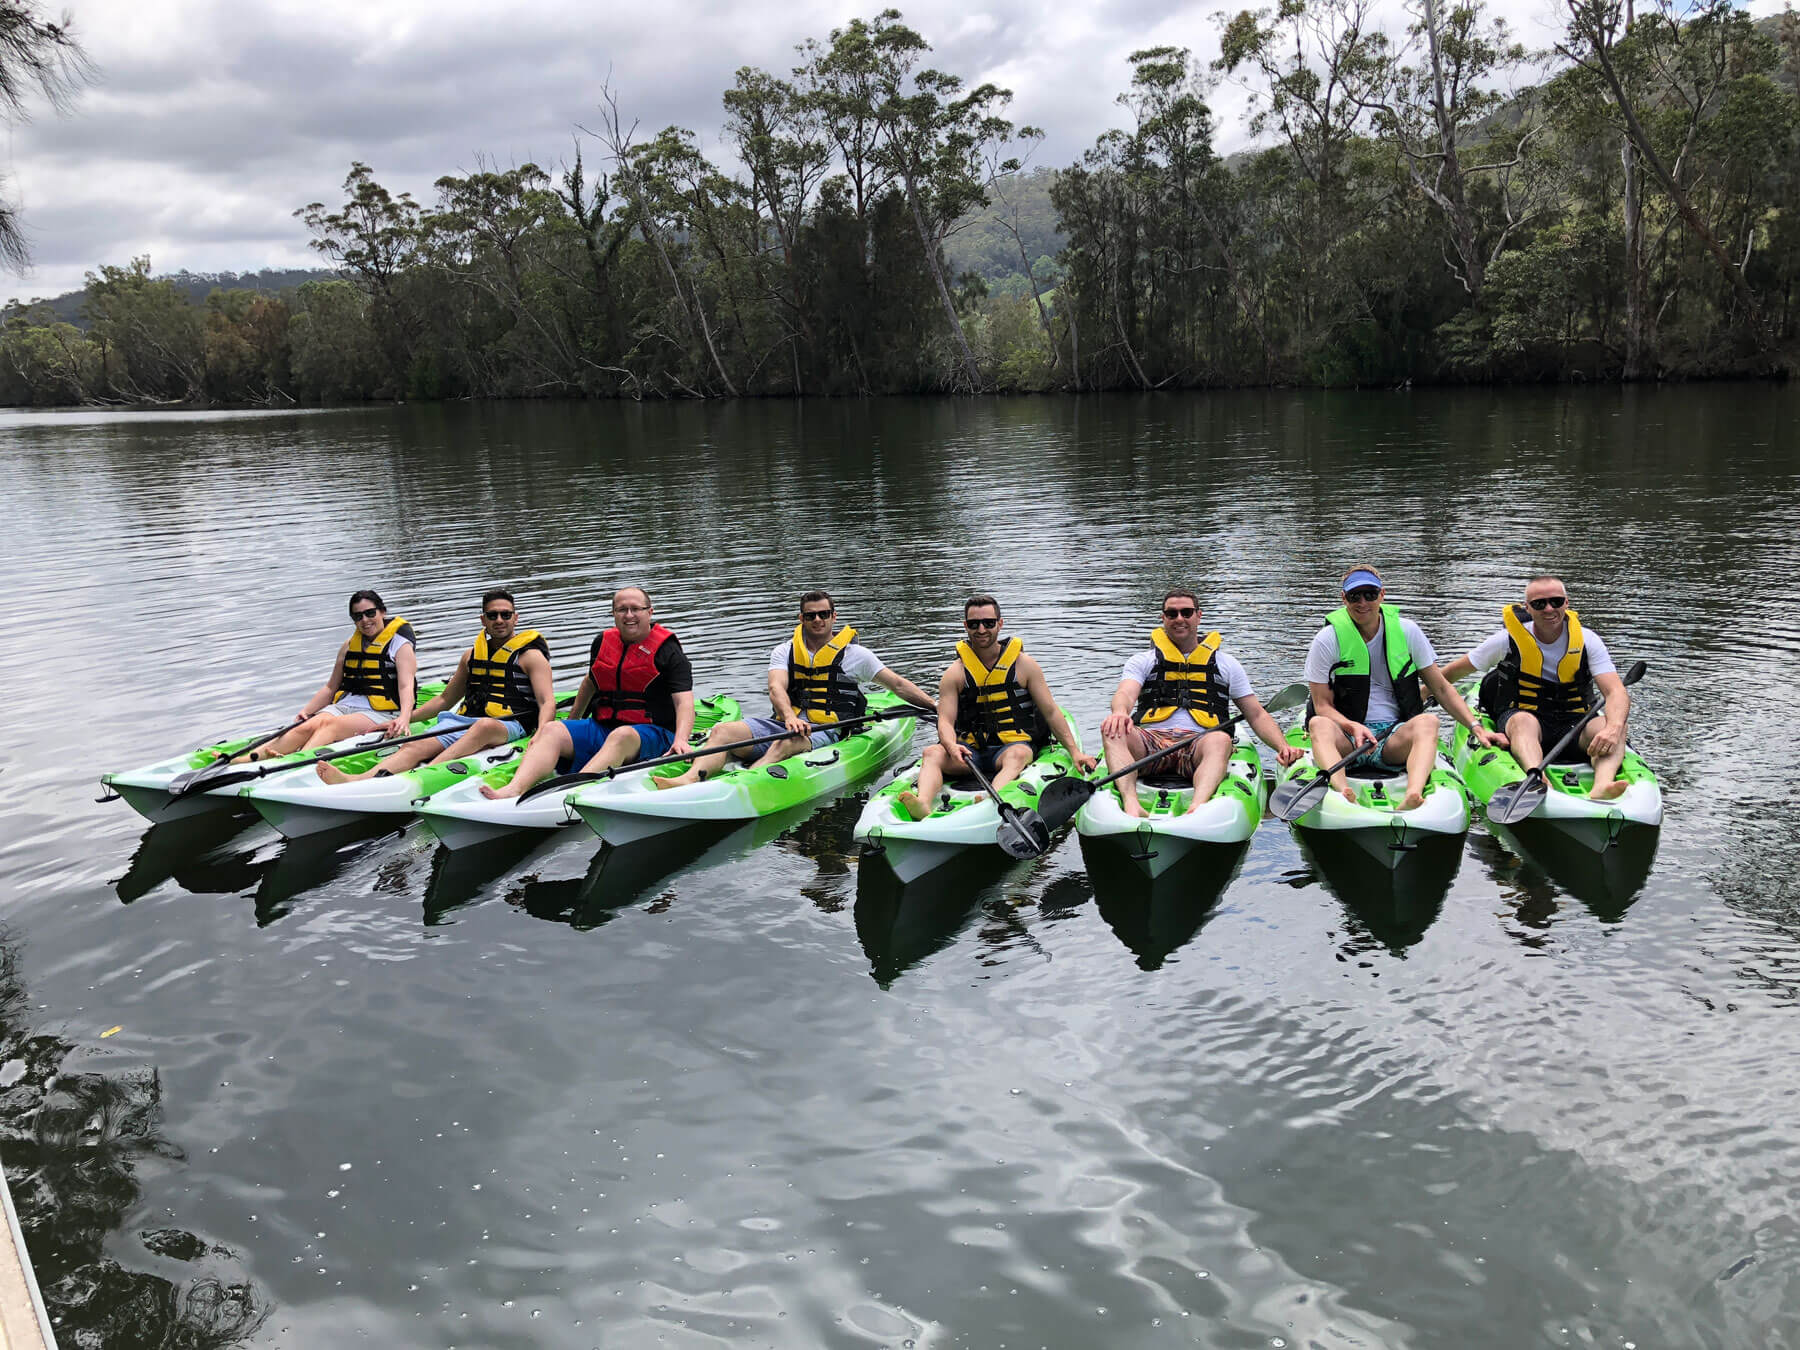 Group of people wearing life jackets seated in individual kayaks in a row on the water with bush in the background